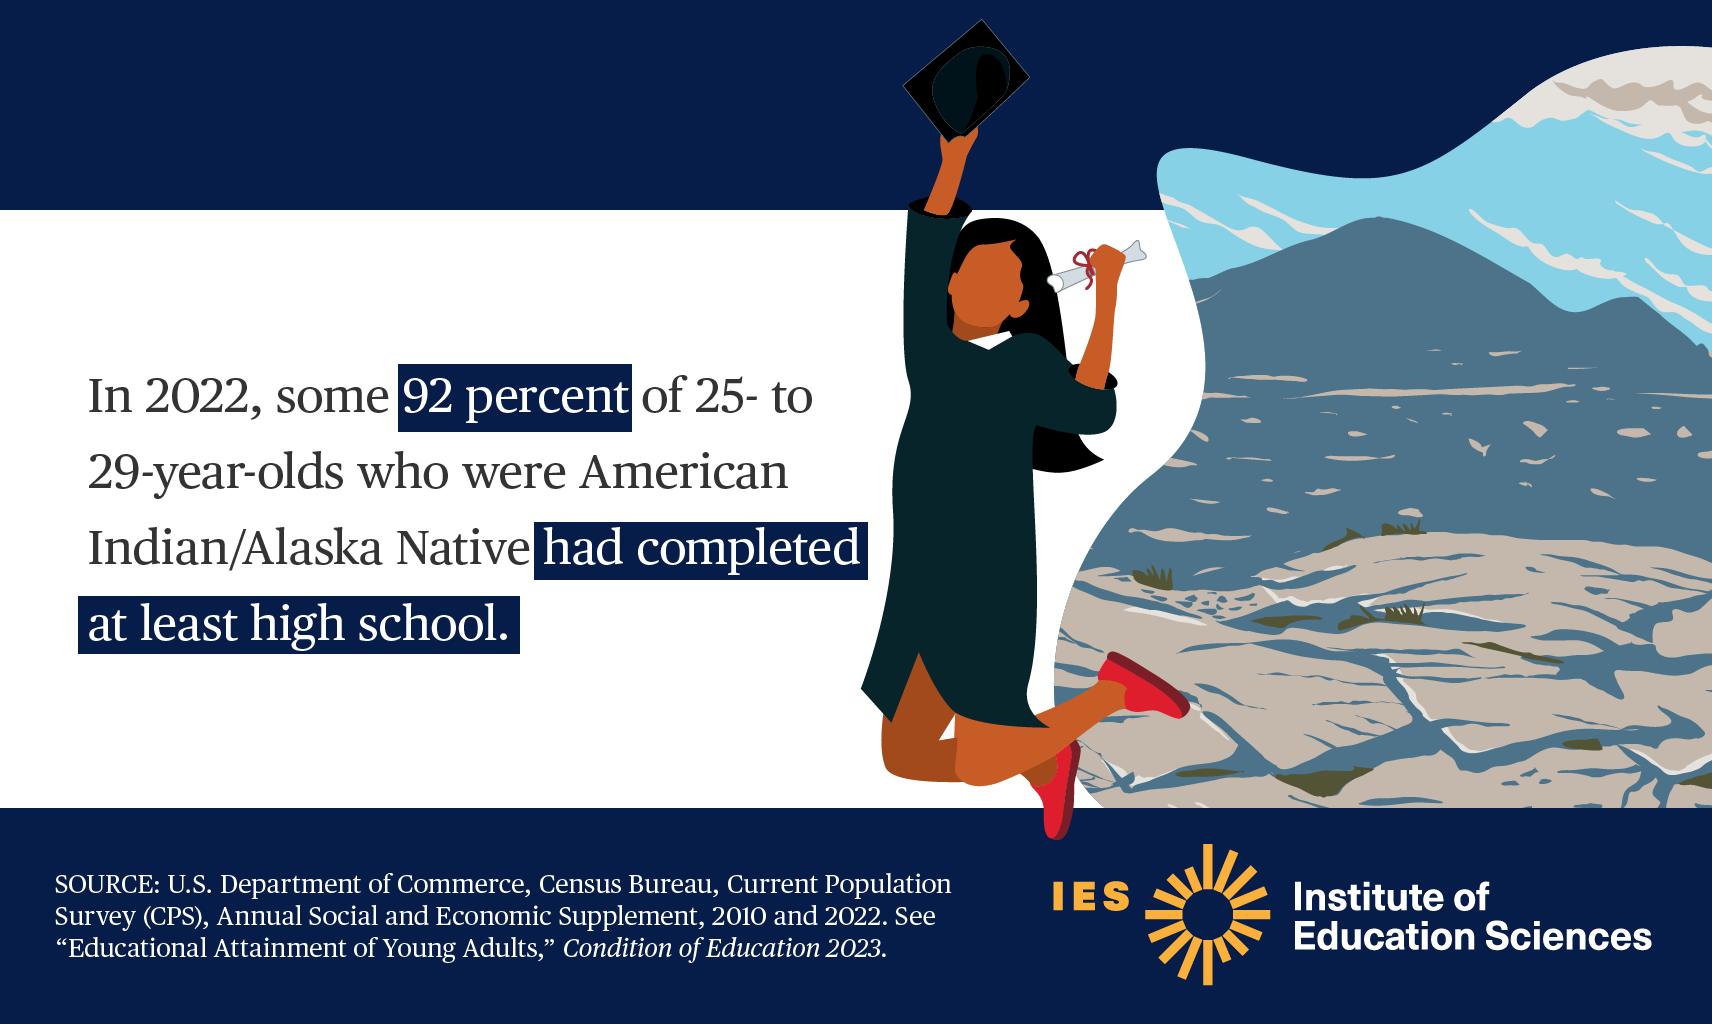  In 2022, some 92 percent of 25- to 29-year olds who were American Indian/Alaska Native had completed at least high school.